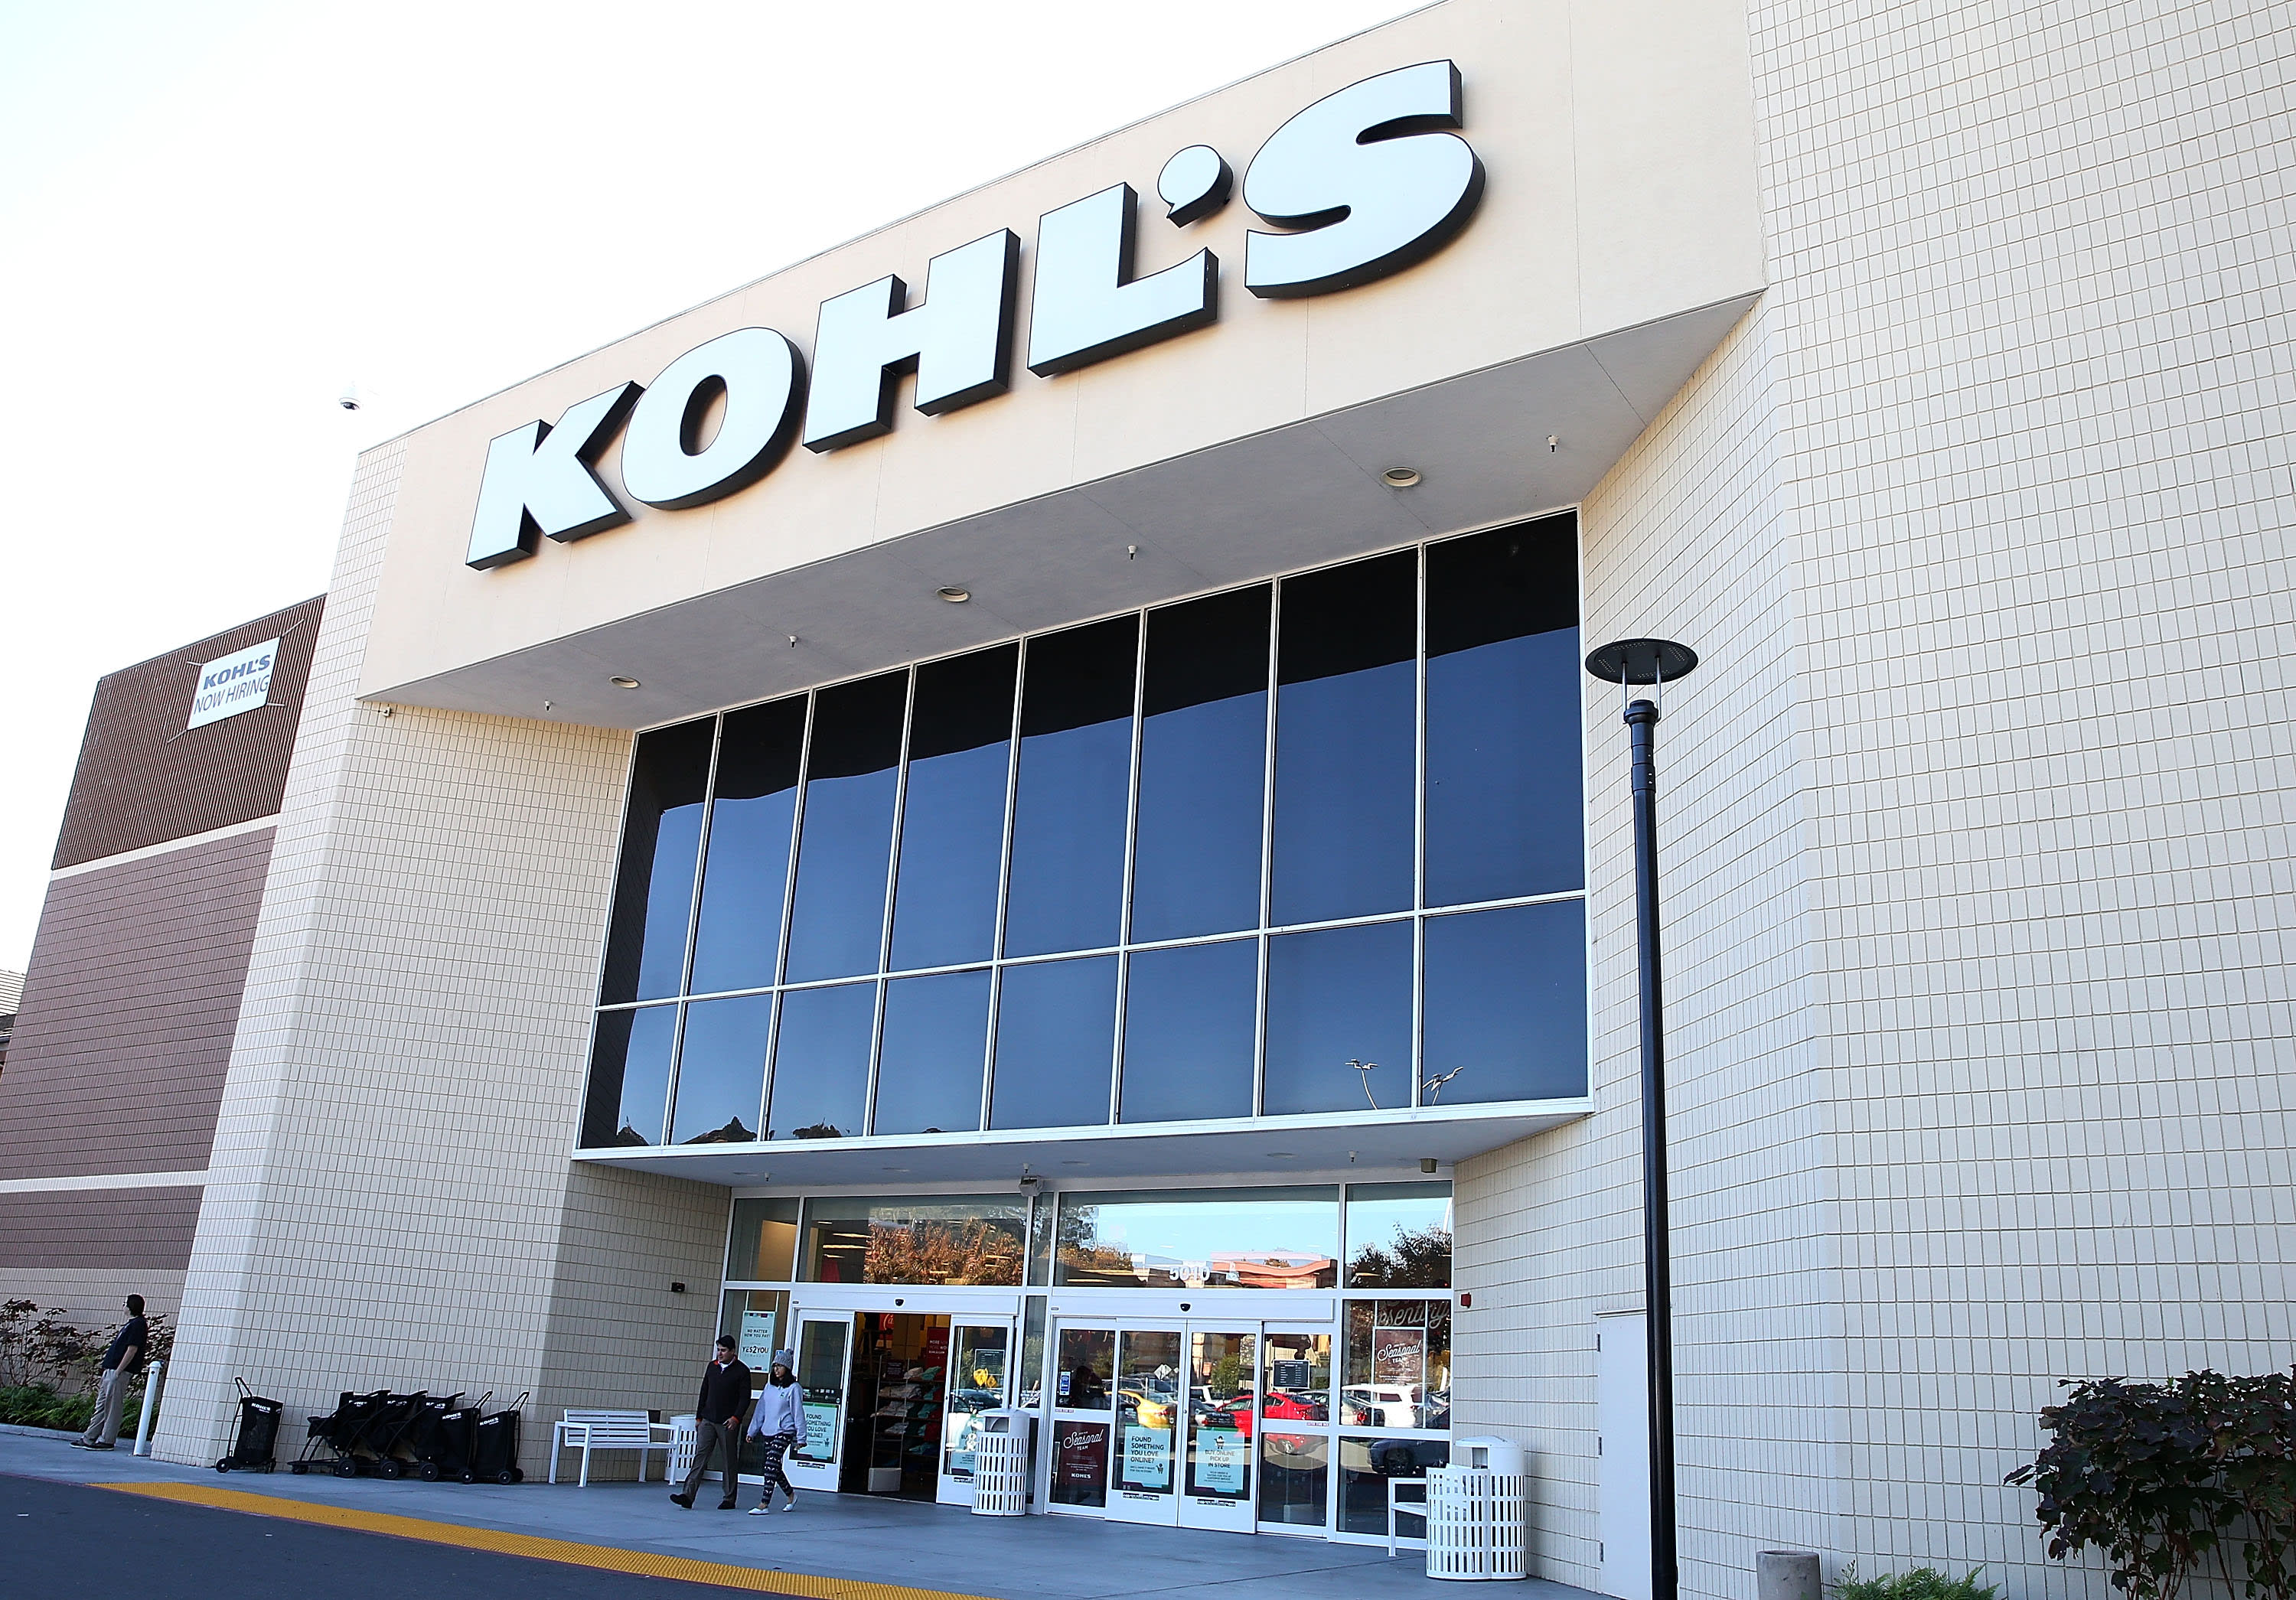 Activist group says Kohl’s profit shows “best of worst” in retail